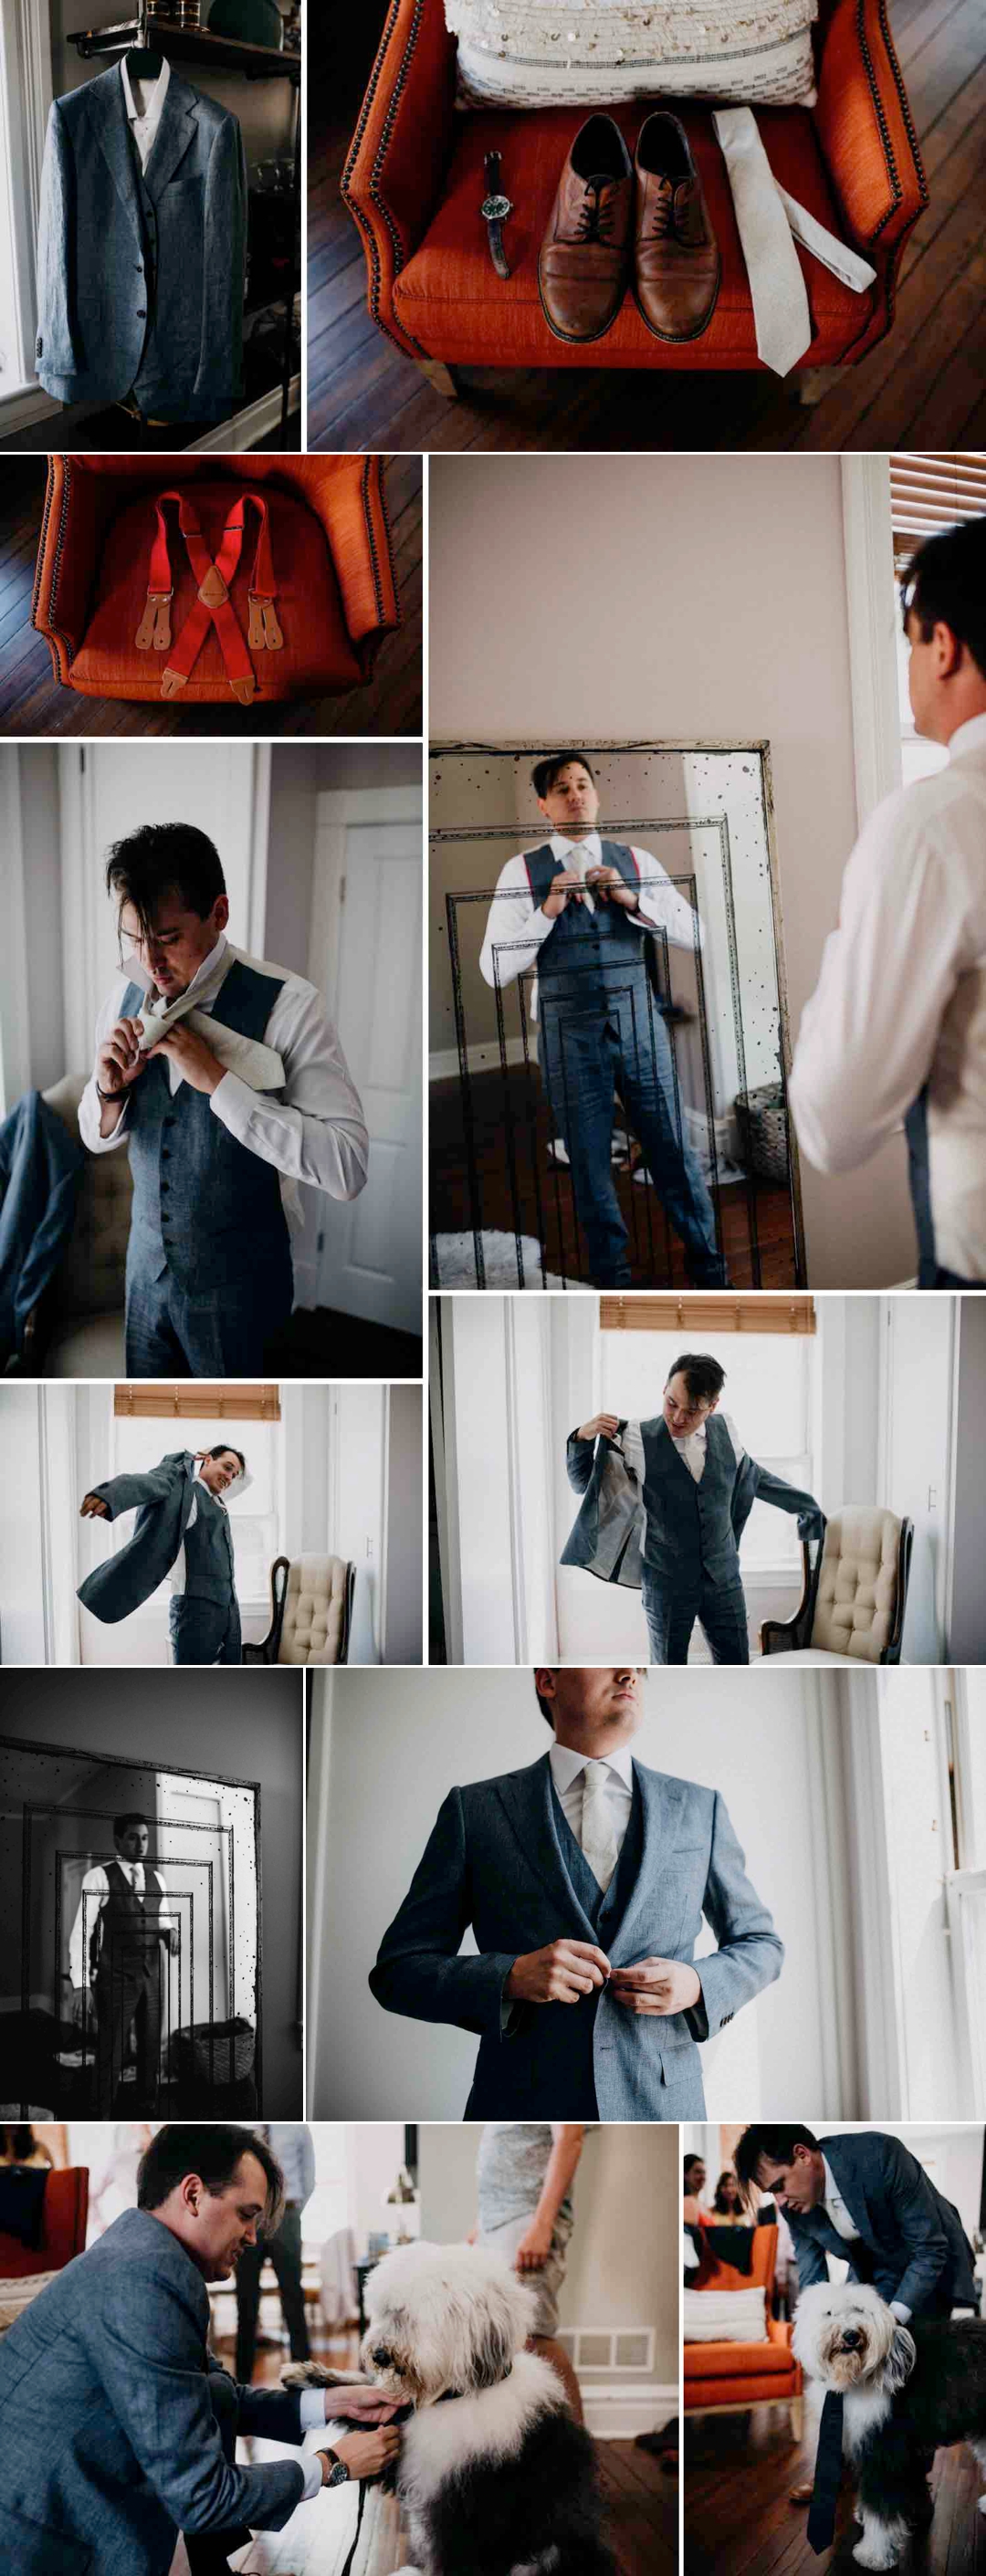 A collage of images of a groom getting ready the morning before his wedding ceremony.